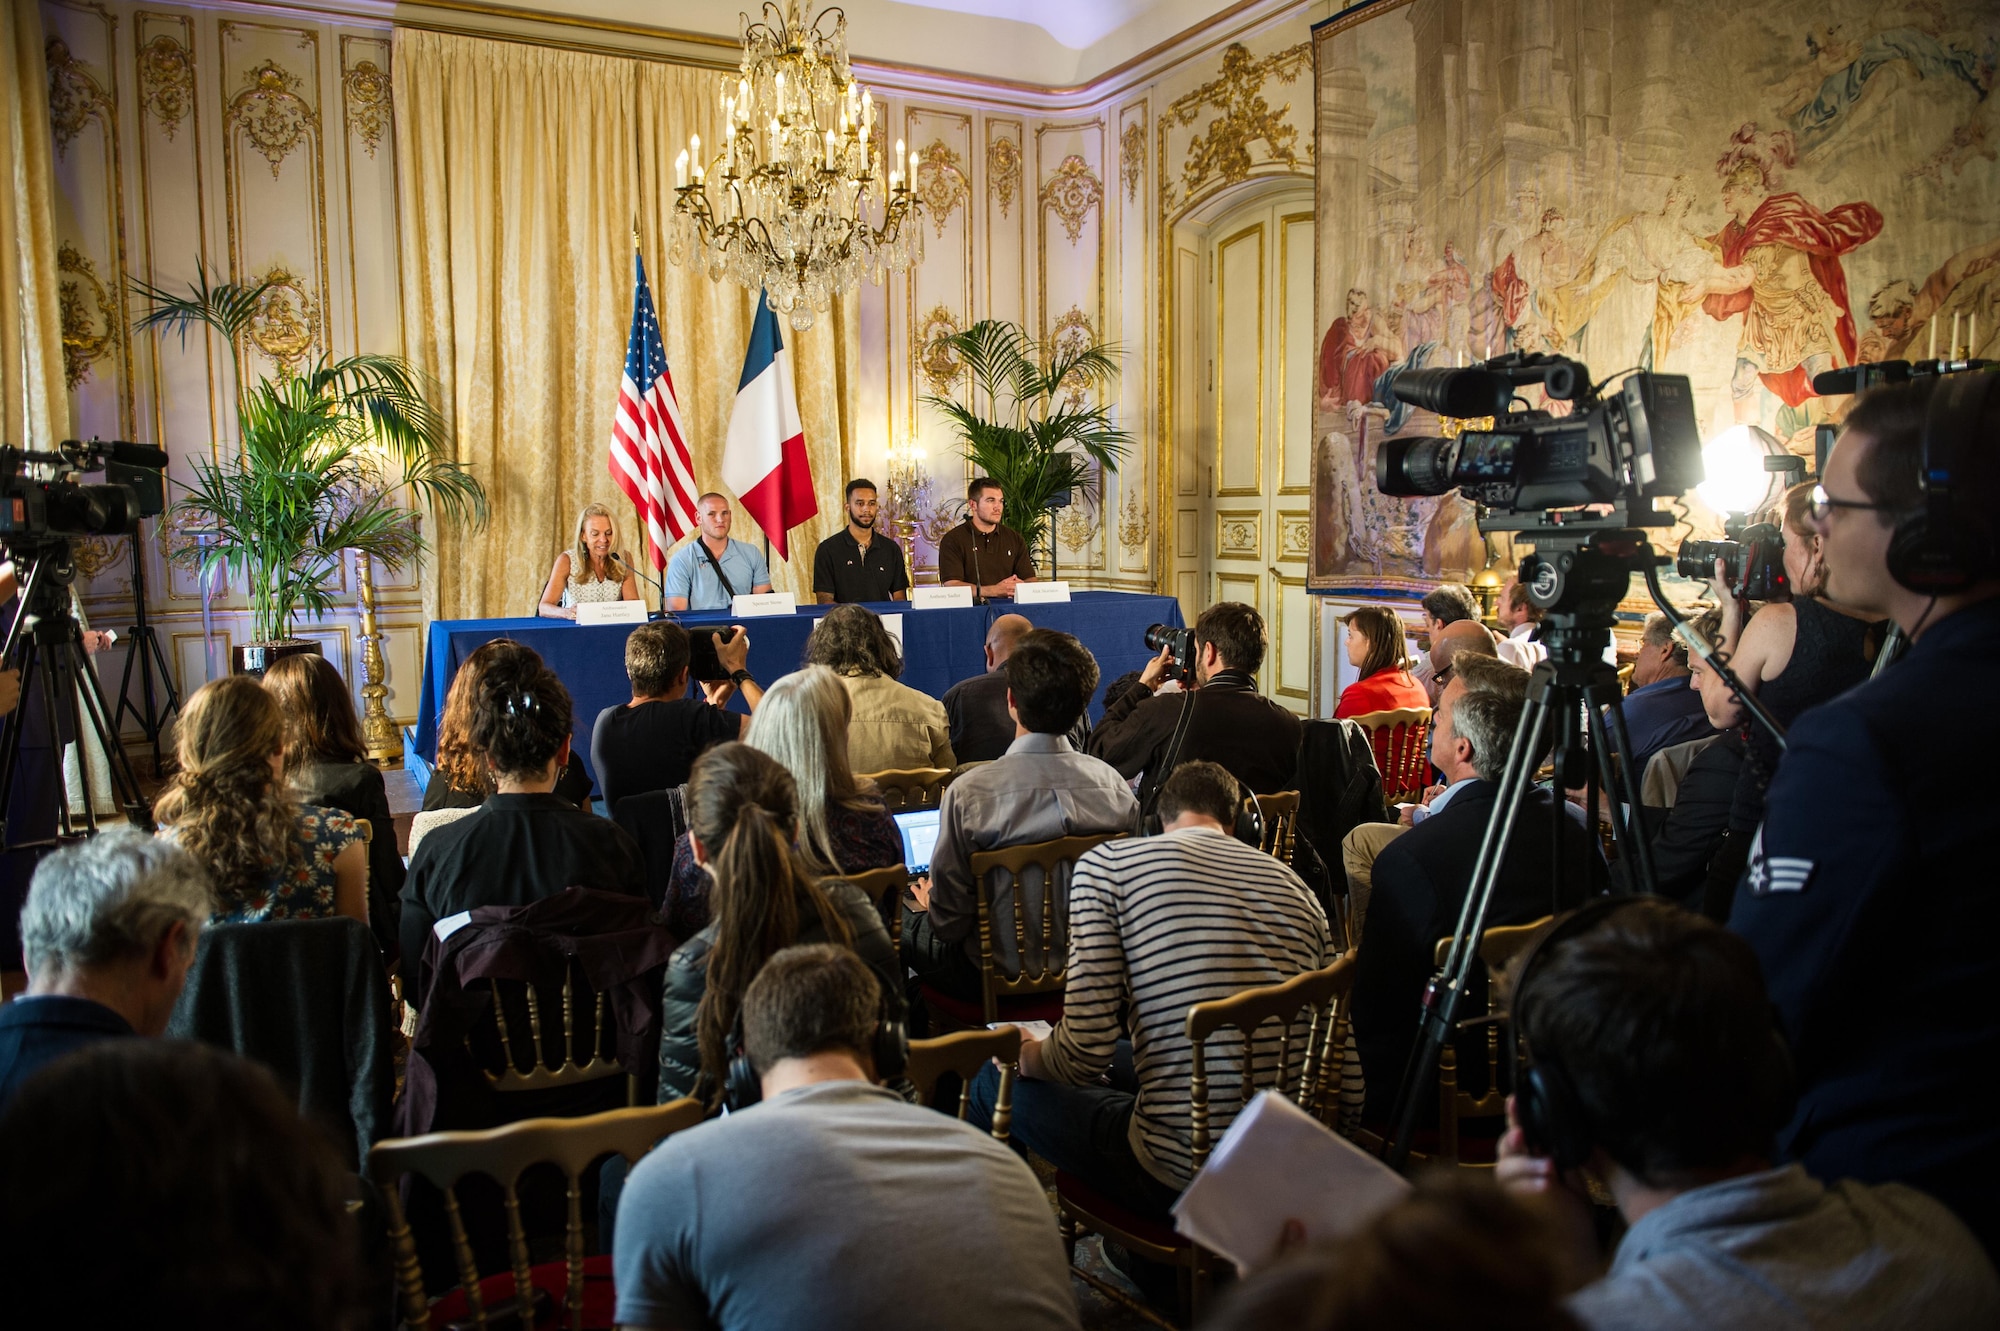 Airman 1st Class Spencer Stone along with Jane D. Hartly,  the U.S. ambassador to France, and his two friends speak at a press conference in Paris Aug. 23, 2015, following a foiled attack on a French train. Stone was on vacation with his childhood friends, Aleksander Skarlatos and Anthony Sadler, when an armed gunman entered their train carrying an assault rifle, a handgun and a box cutter. The three friends, with the help of a British passenger, subdued the gunman after his rifle jammed. Stone’s medical background prepared him to begin treating wounded passengers while waiting for the authorities to arrive. Stone is an ambulance service technician assigned to the 65th Medical Operations Squadron stationed at Lajes Field, Azores. (U.S. Air Force photo/Tech. Sgt. Ryan Crane)